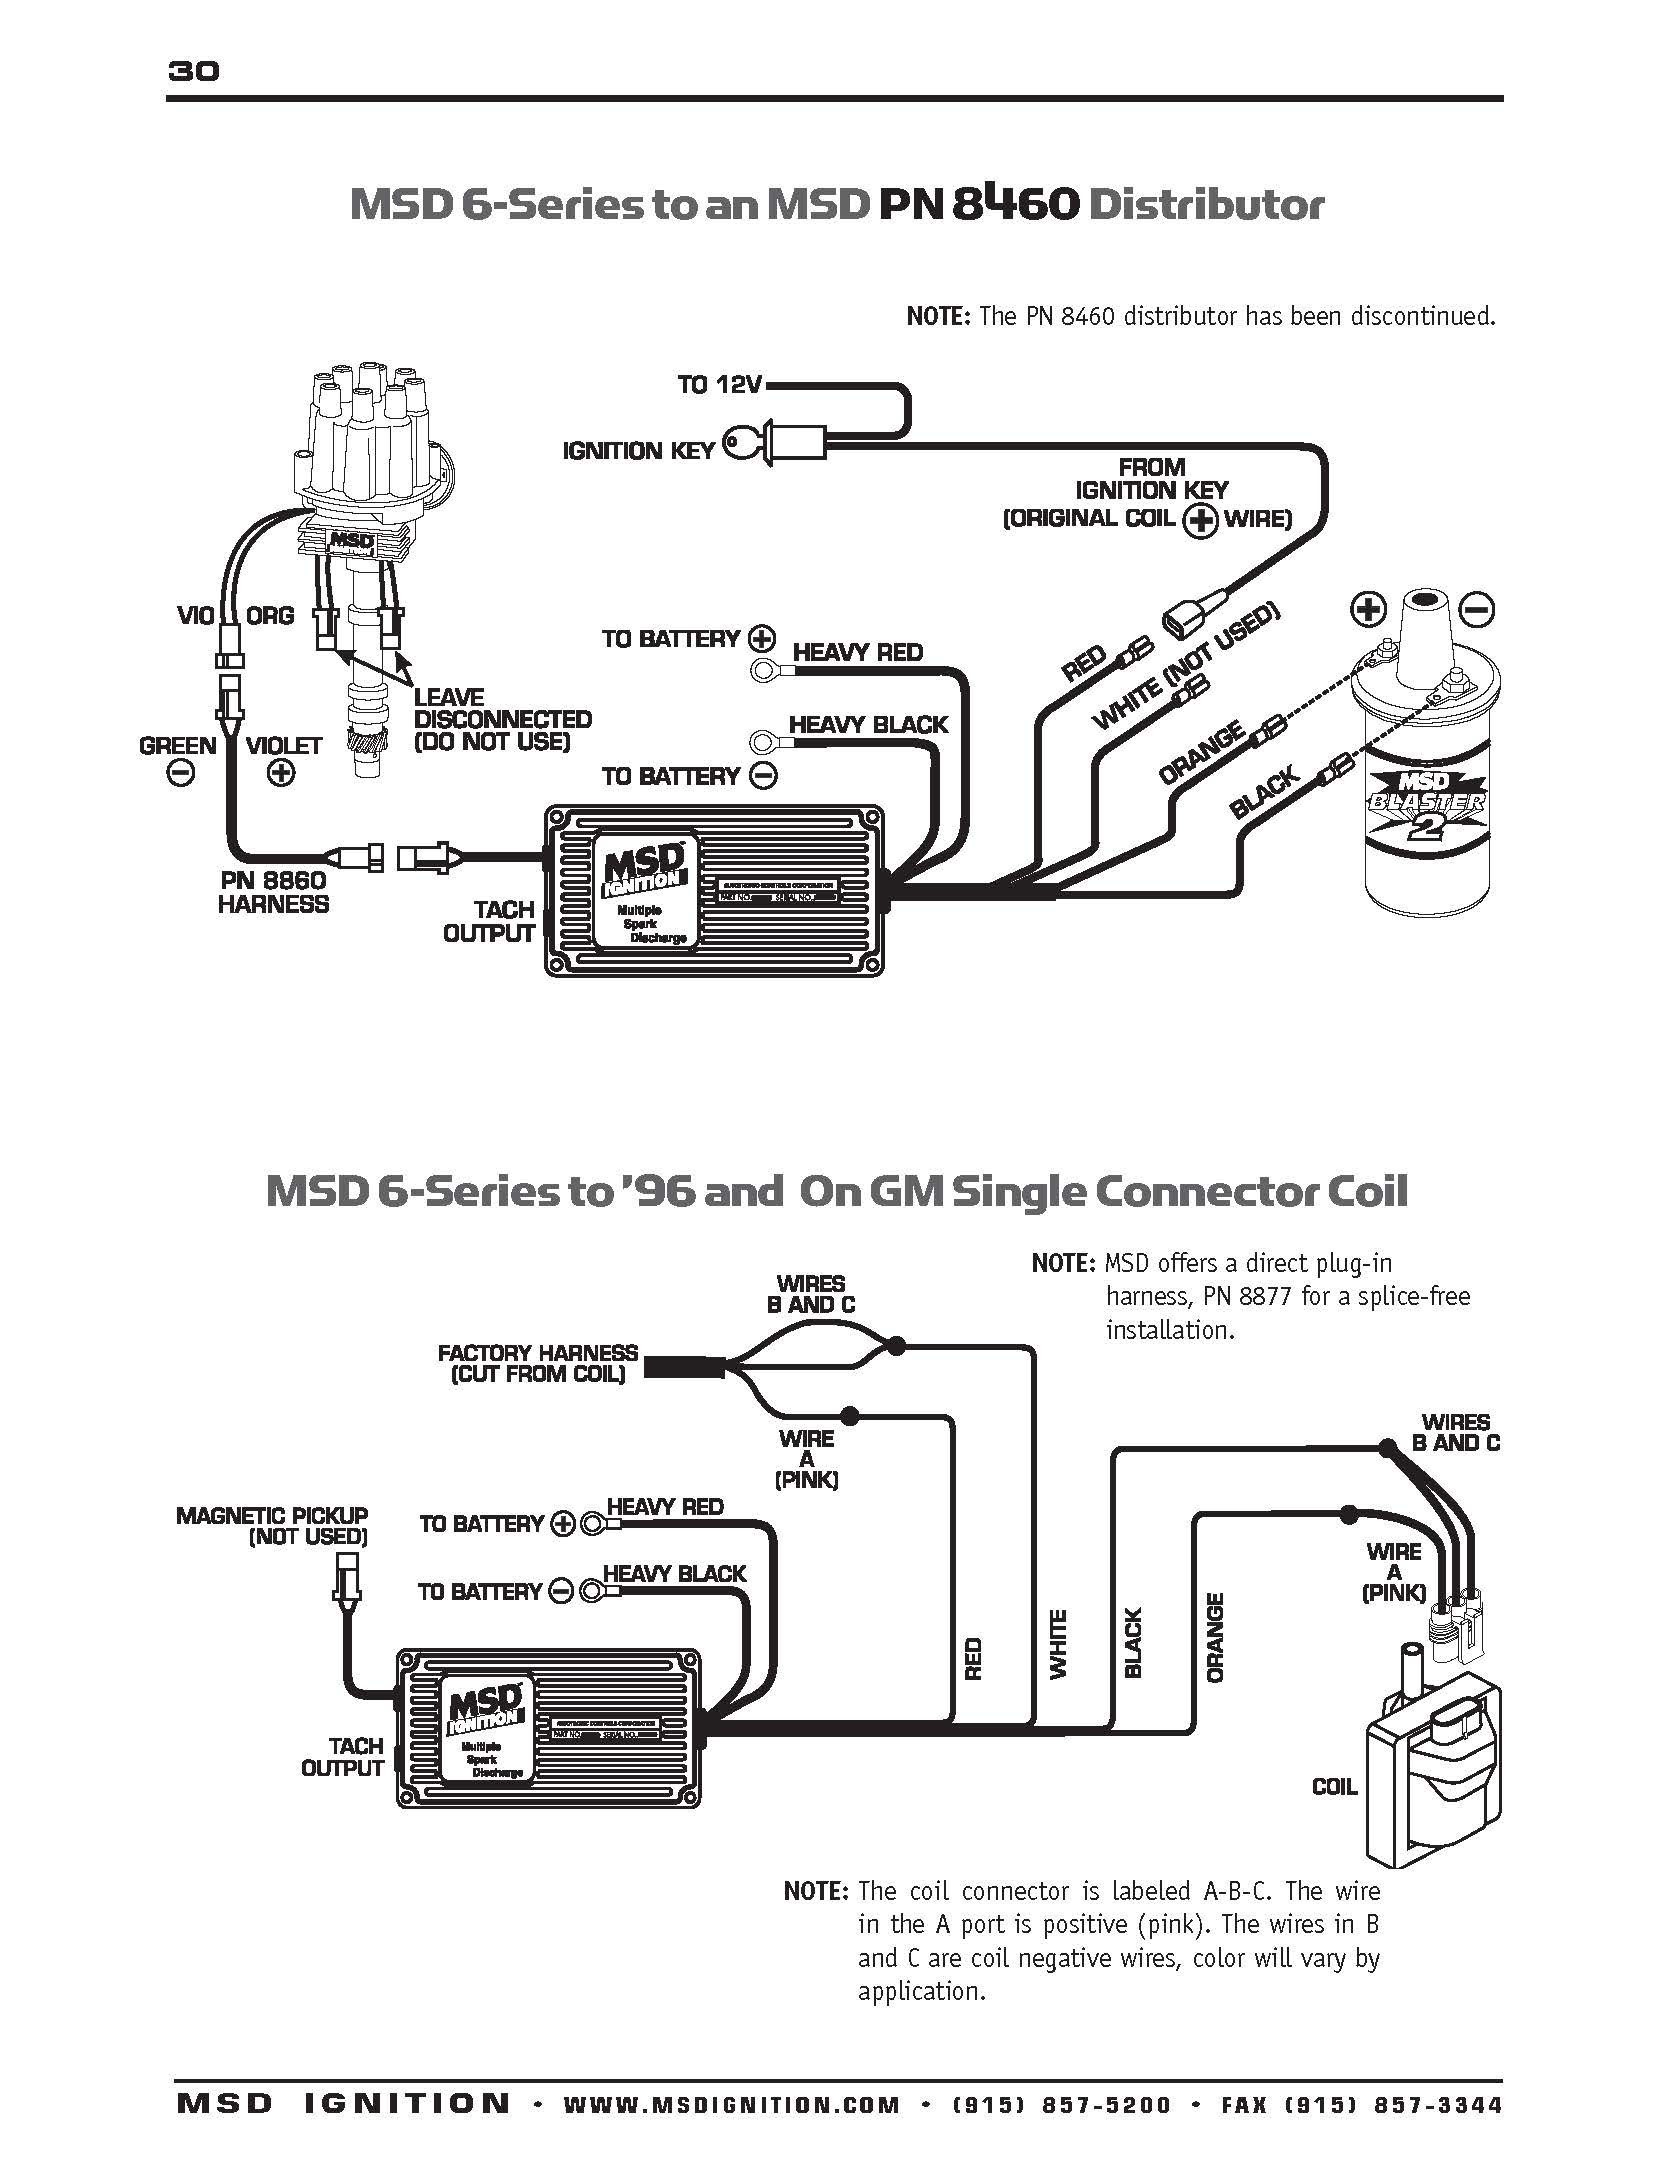 Ignition System Troubleshooting Wiring Diagram New Msd Ignition Wiring Diagram Inspirational Msd Ignition Wiring